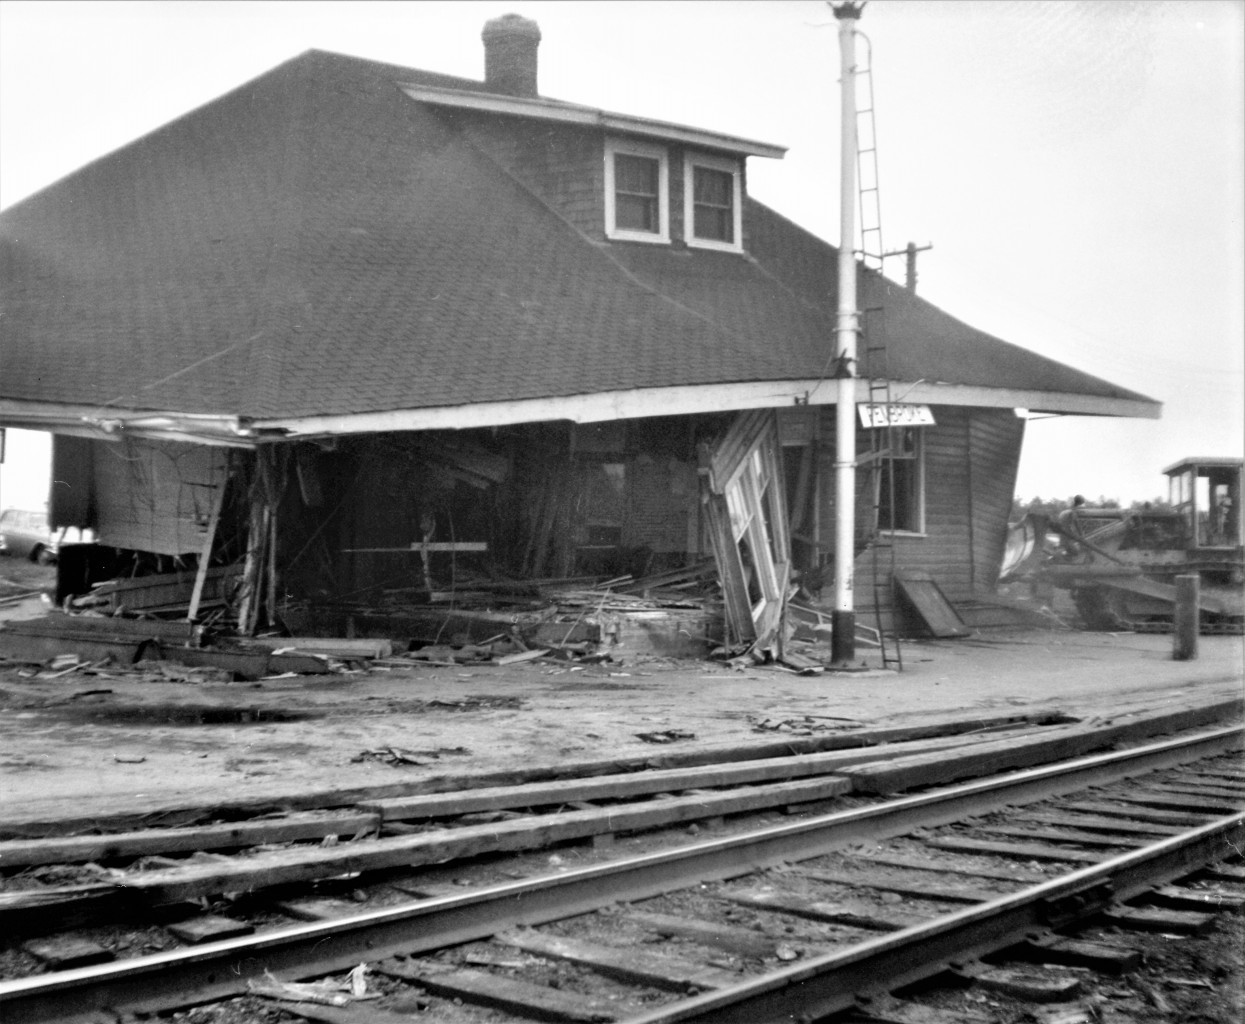 On the morning of Tuesday, August 31st, 1965, after westbound freight 401 passed, crews went to work to erase the old wood frame CN Pembroke Ontario station from the planet.  As the entire structure was deemed as scrap, no effort was made to save anything.  The process took only about a hour.  Location is approximate.